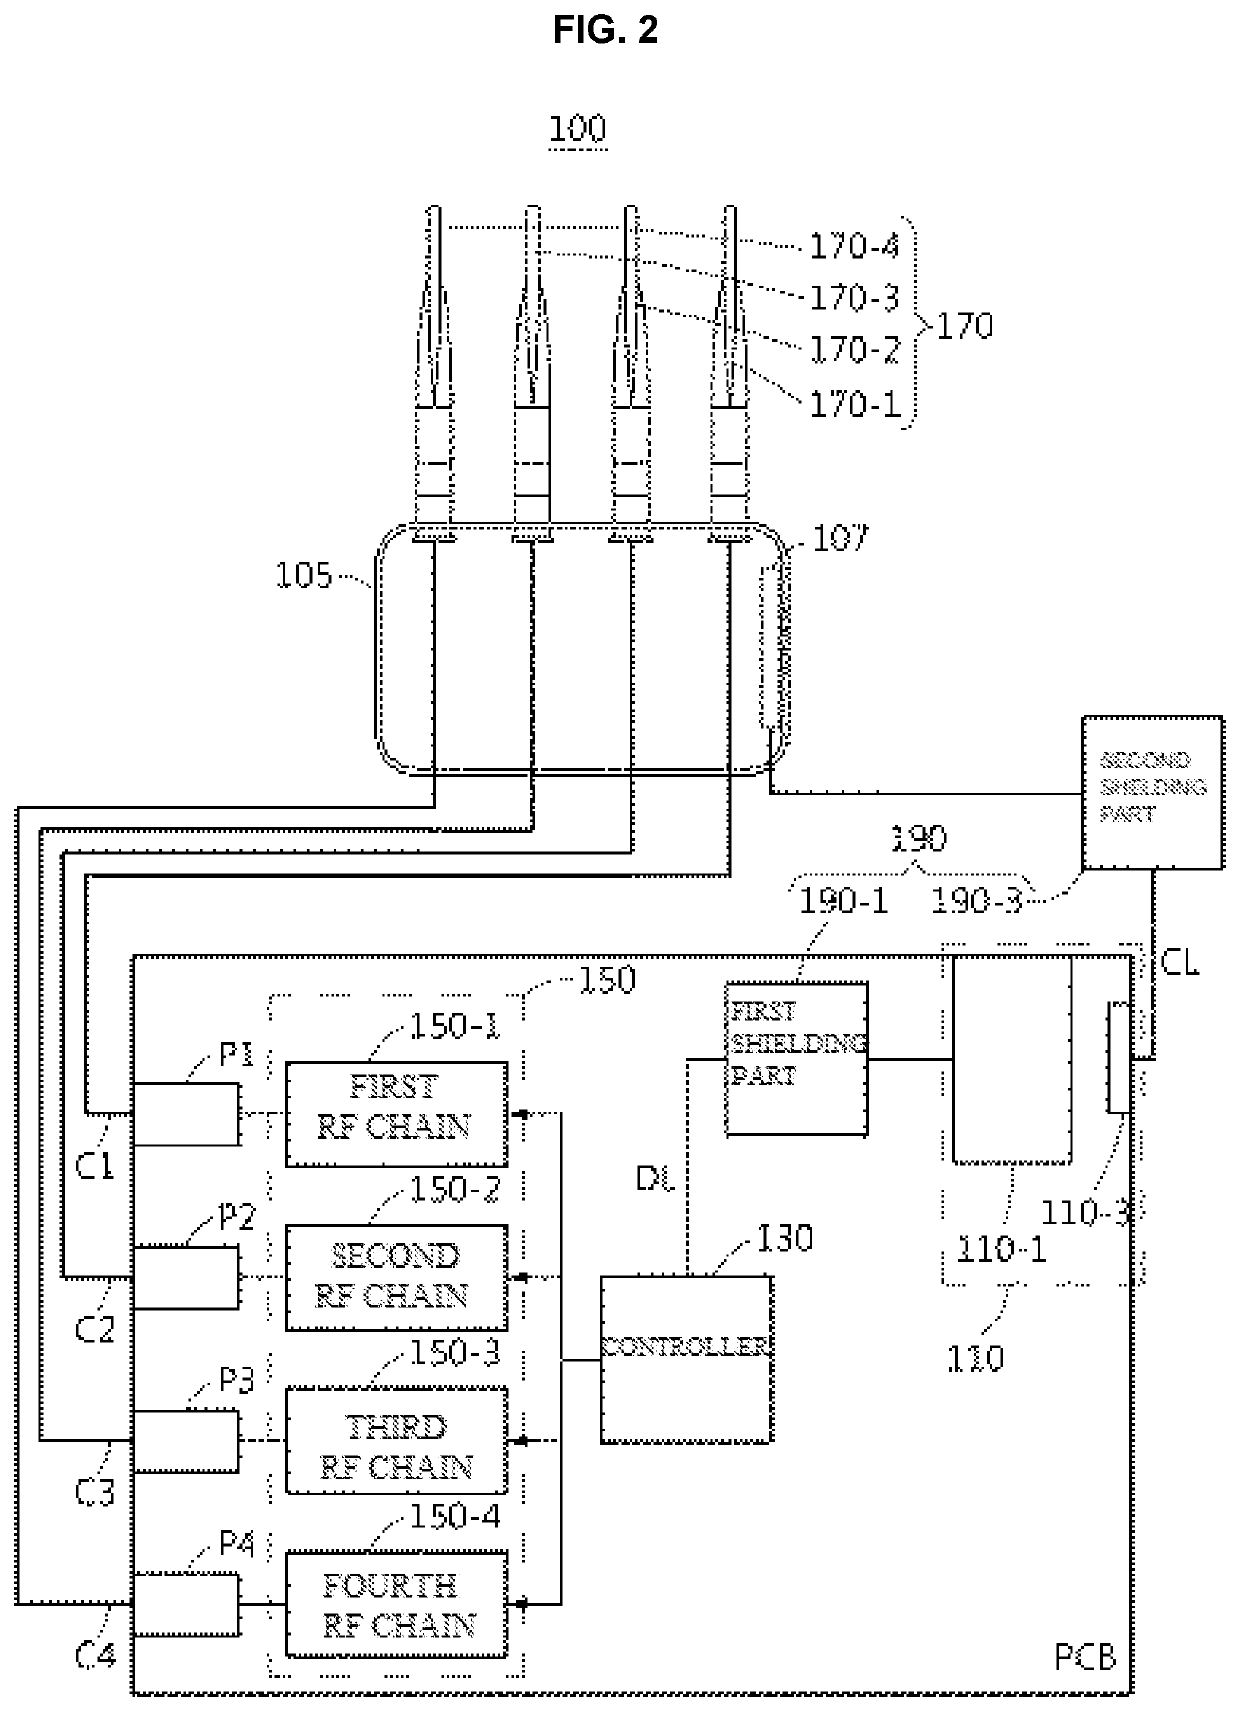 Wireless video bridge for removing electromagnetic radiation noise, and system comprising same